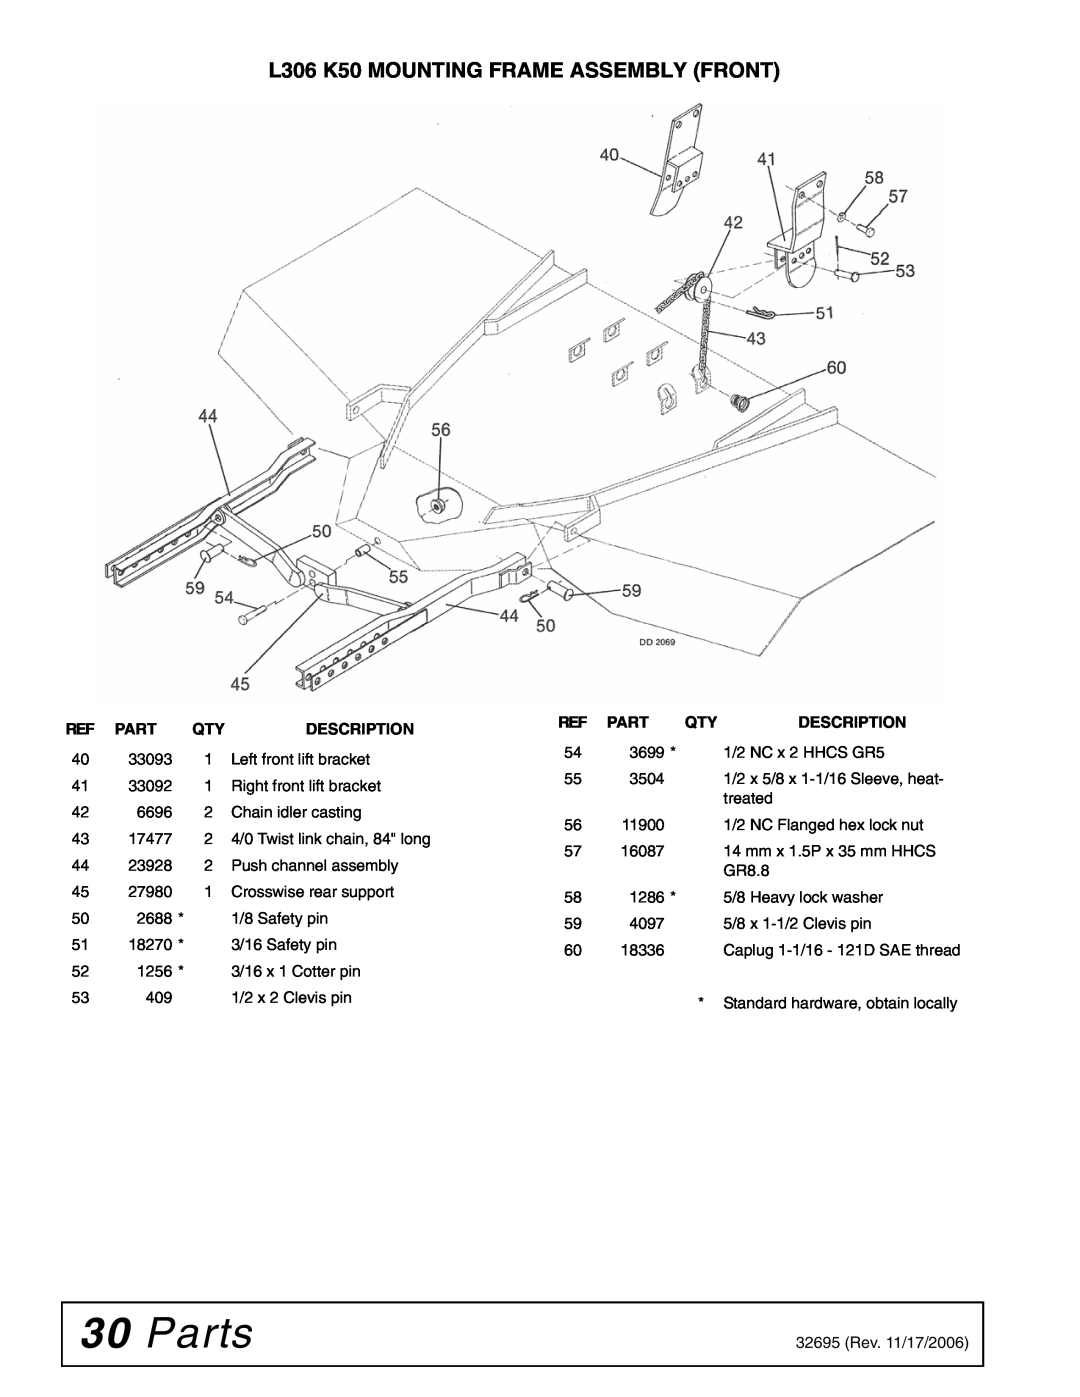 Woods Equipment manual Parts, L306 K50 MOUNTING FRAME ASSEMBLY FRONT 